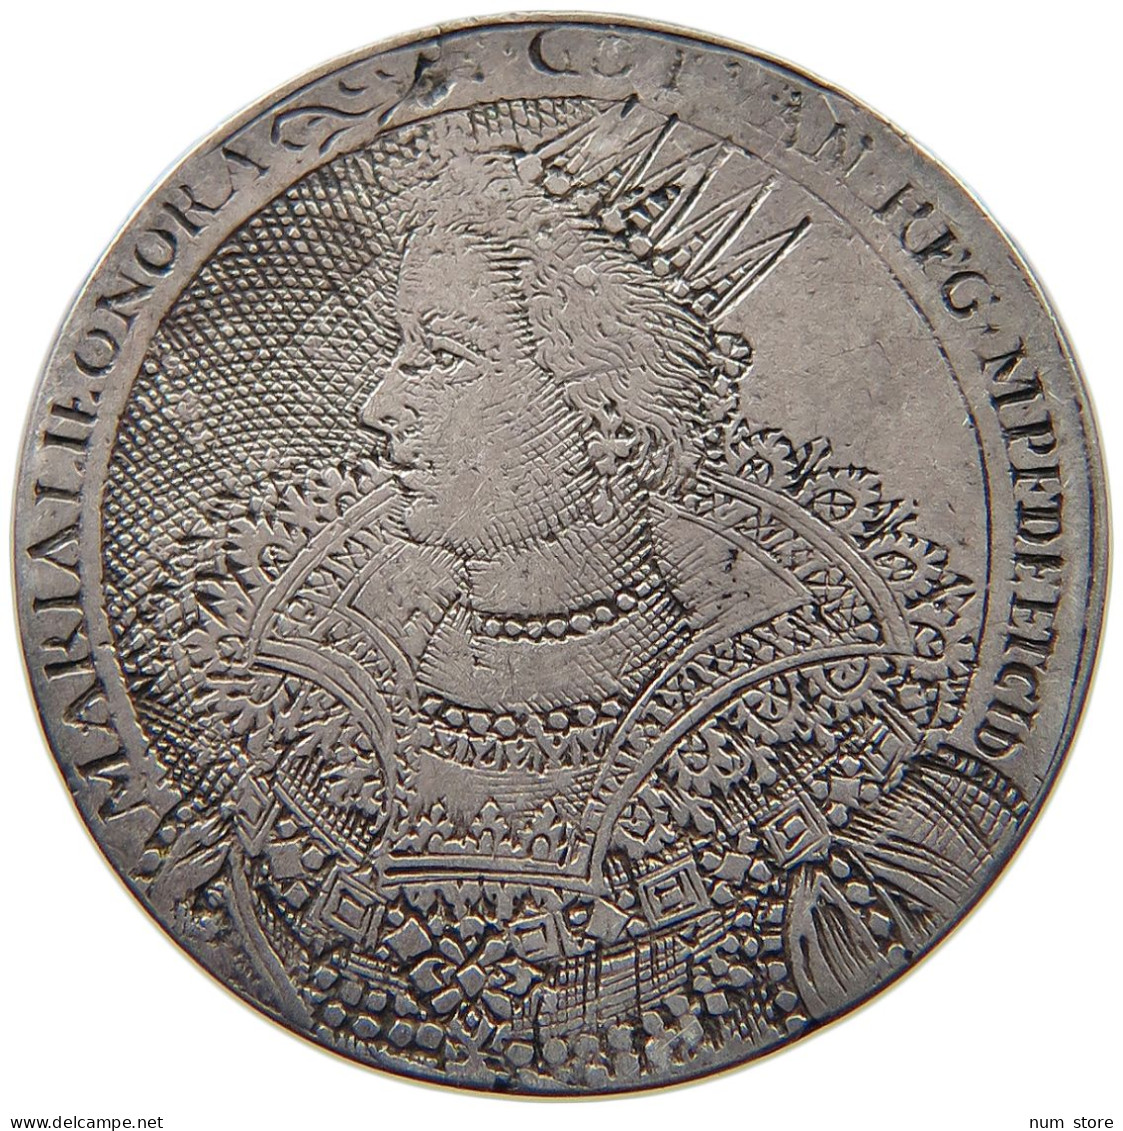 GREAT BRITAIN SILVER COUNTER  ENGRAVED SILVER COUNTER 17TH GUSTAF ADOPH #t119 0089 - 1485-1662 : Tudor / Stuart